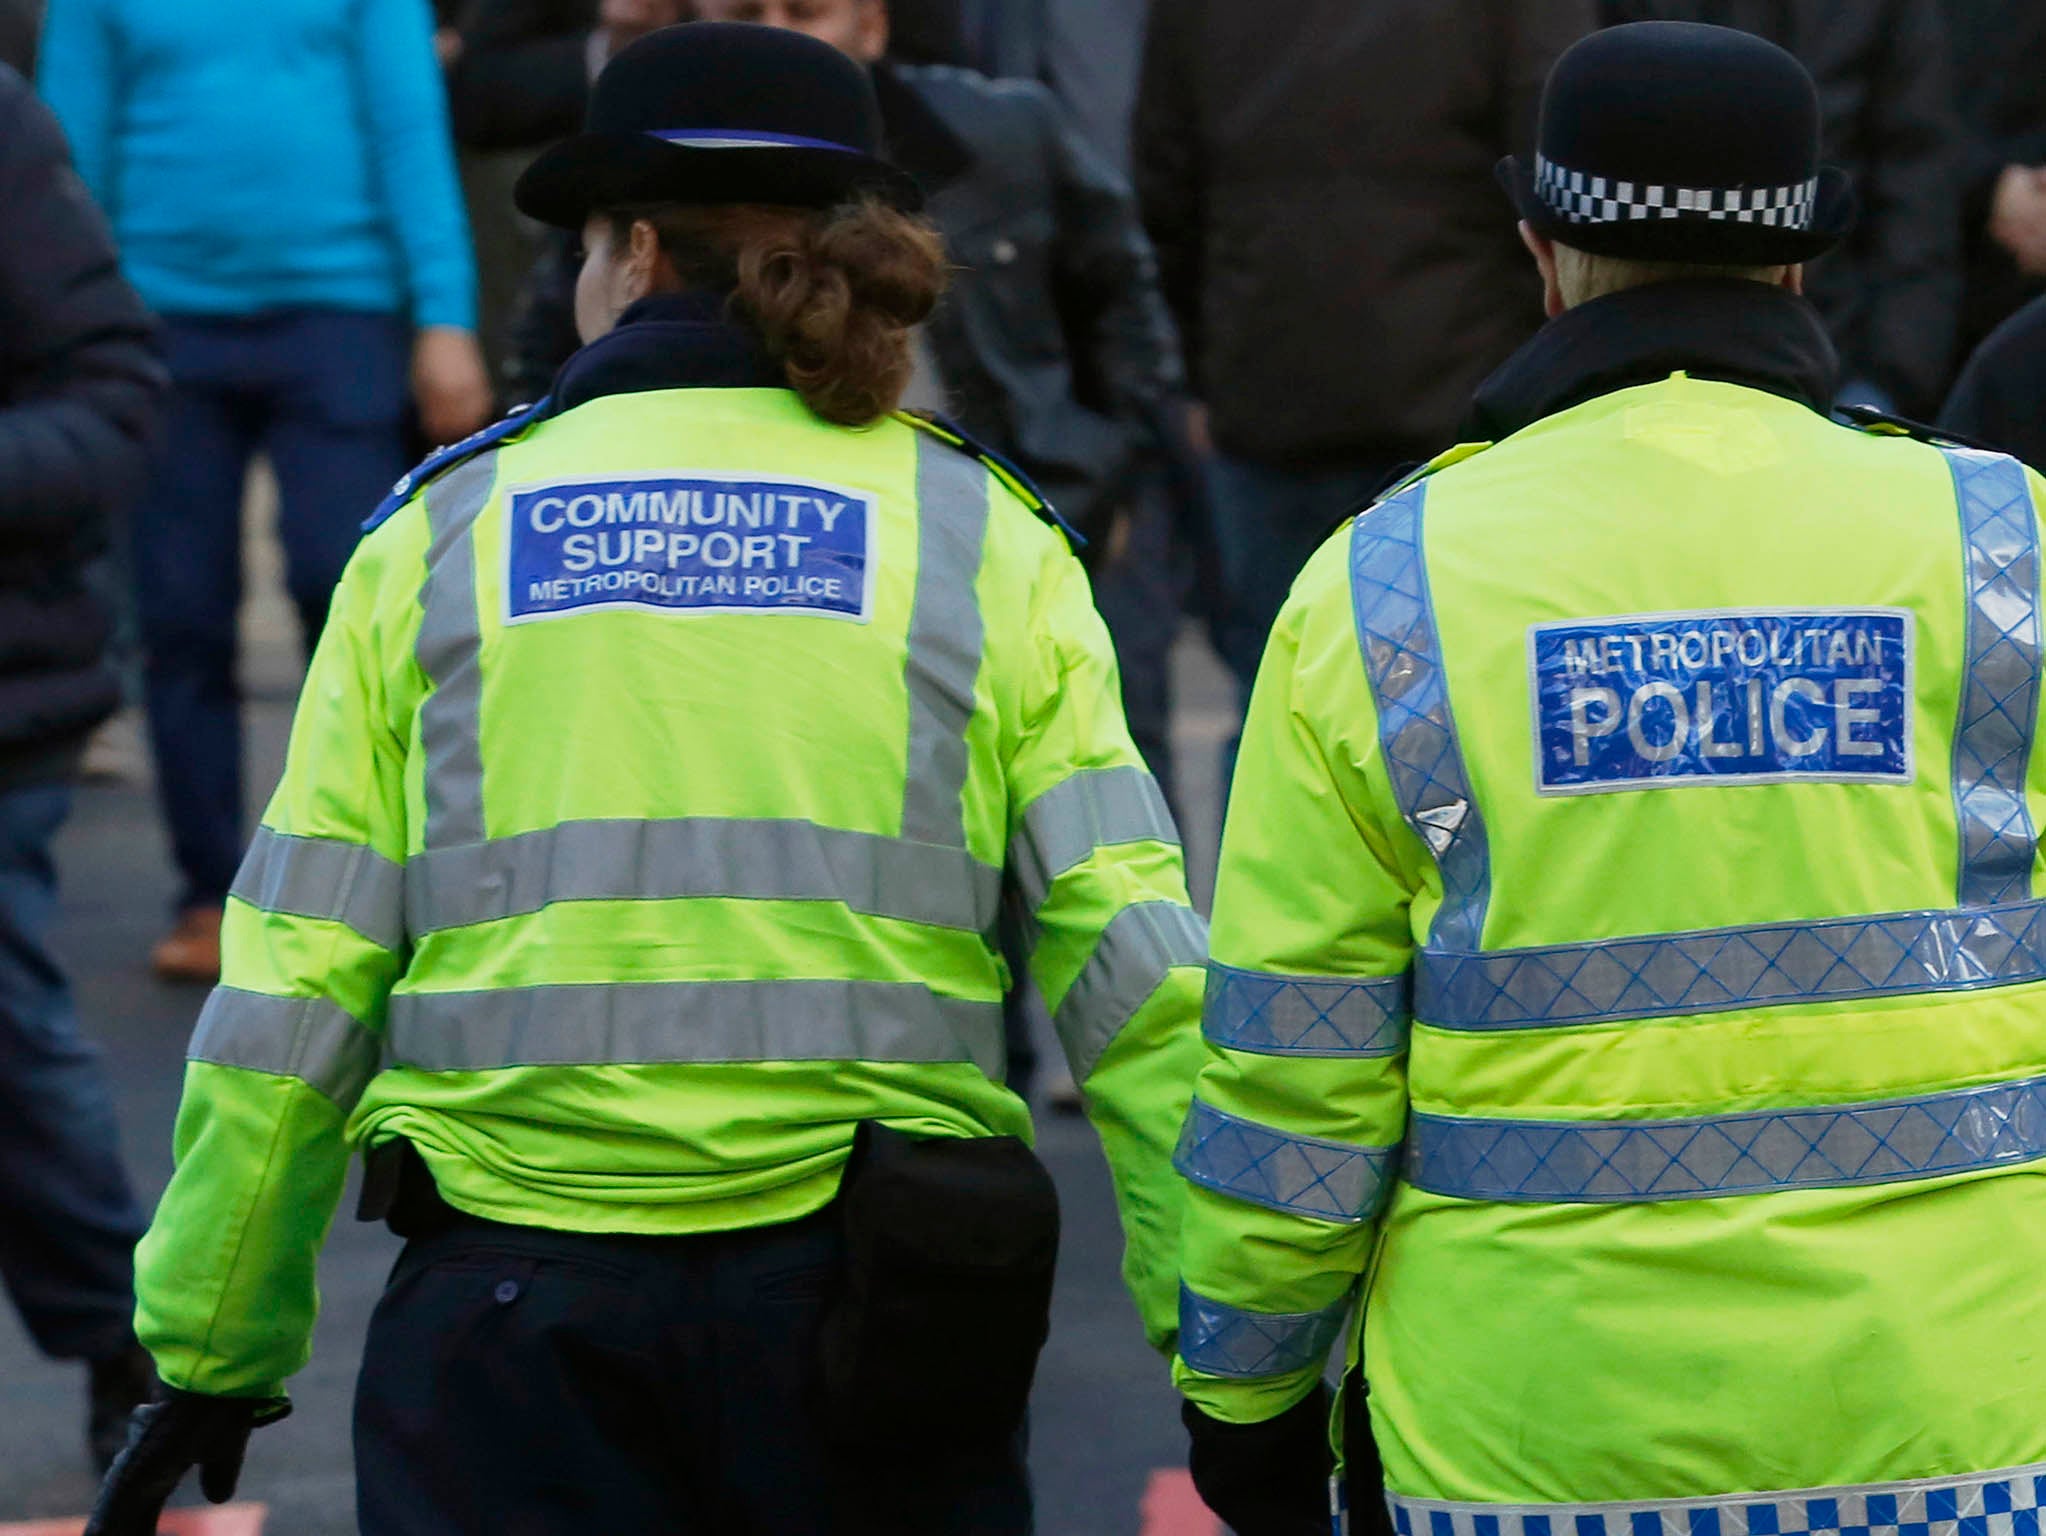 There are currently at least 9,000 volunteers working with police forces